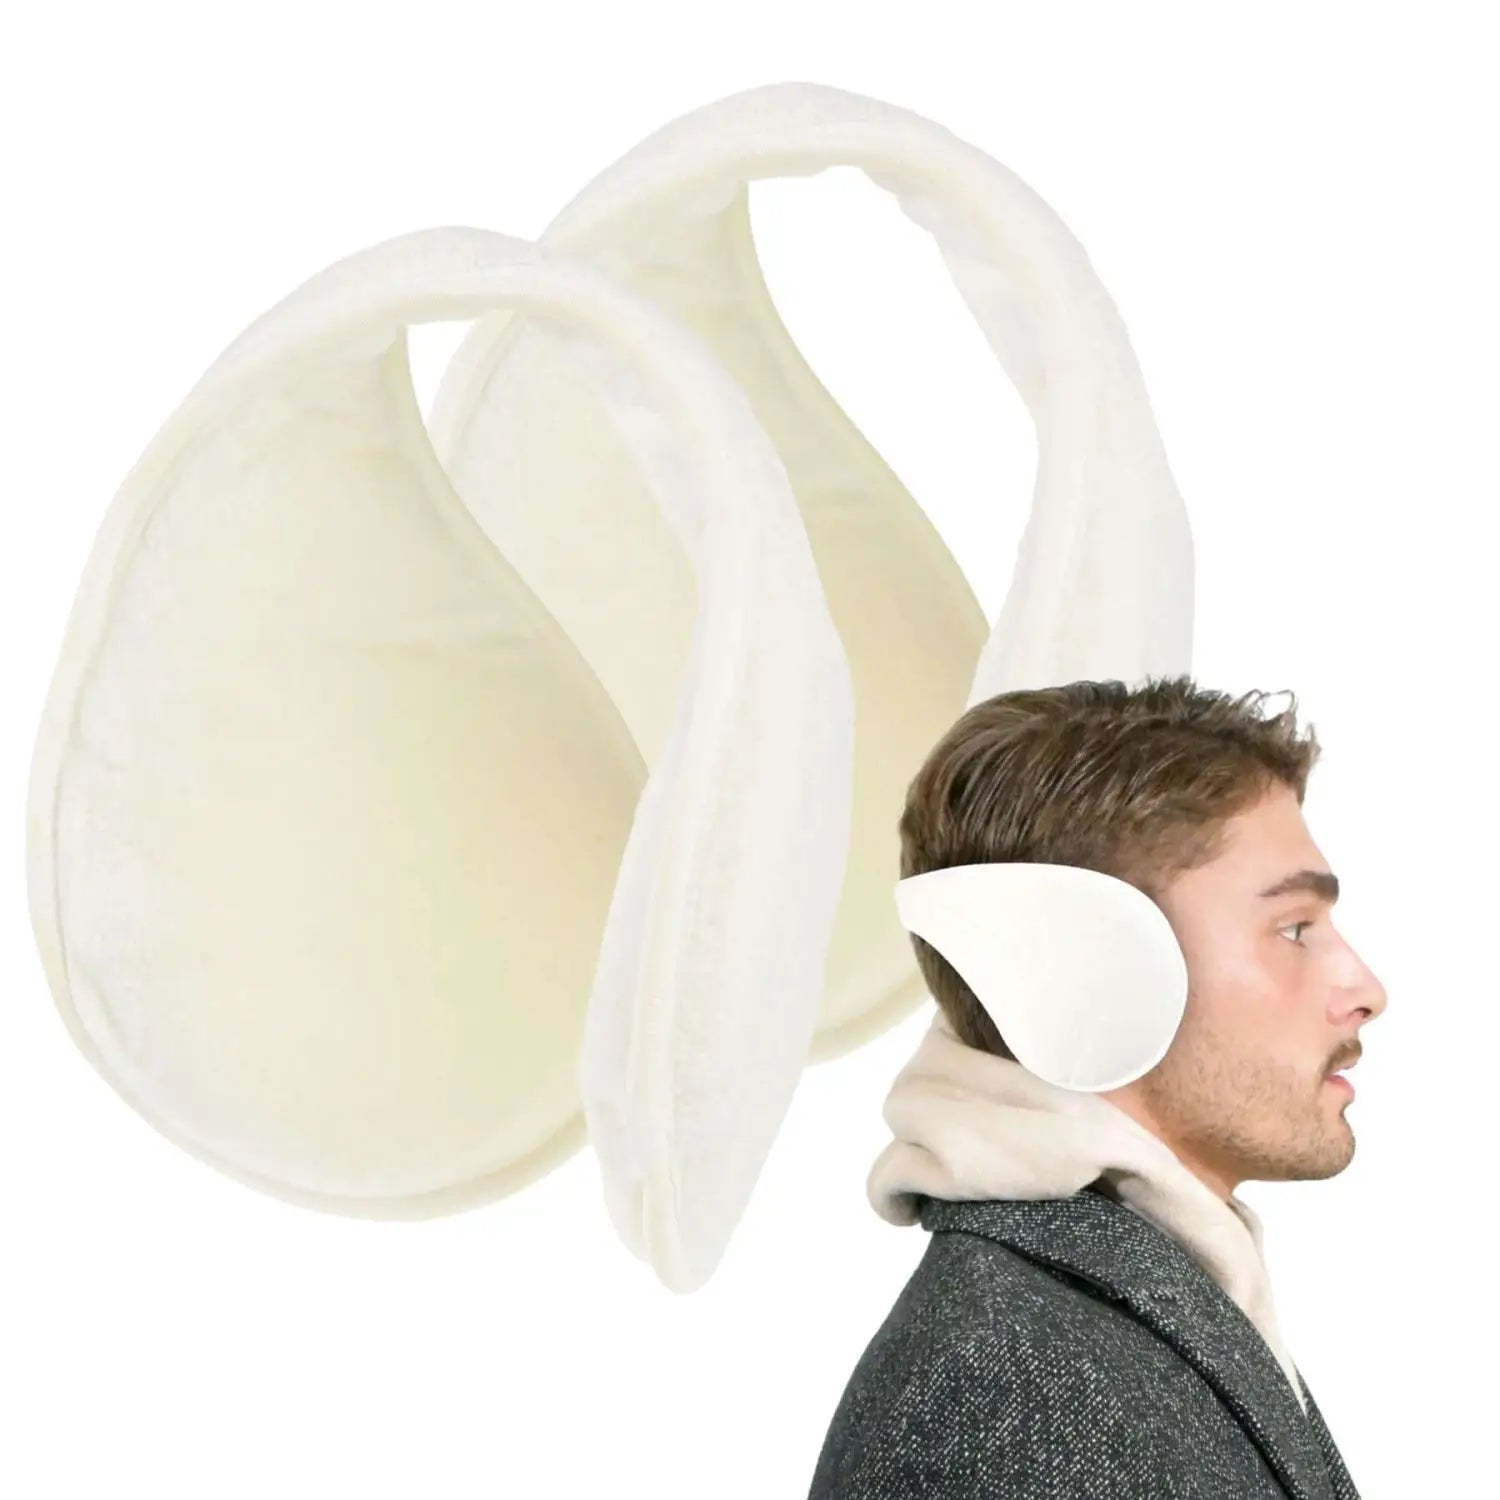 Extra wide winter ear muffs for men - man with white hat and scarf